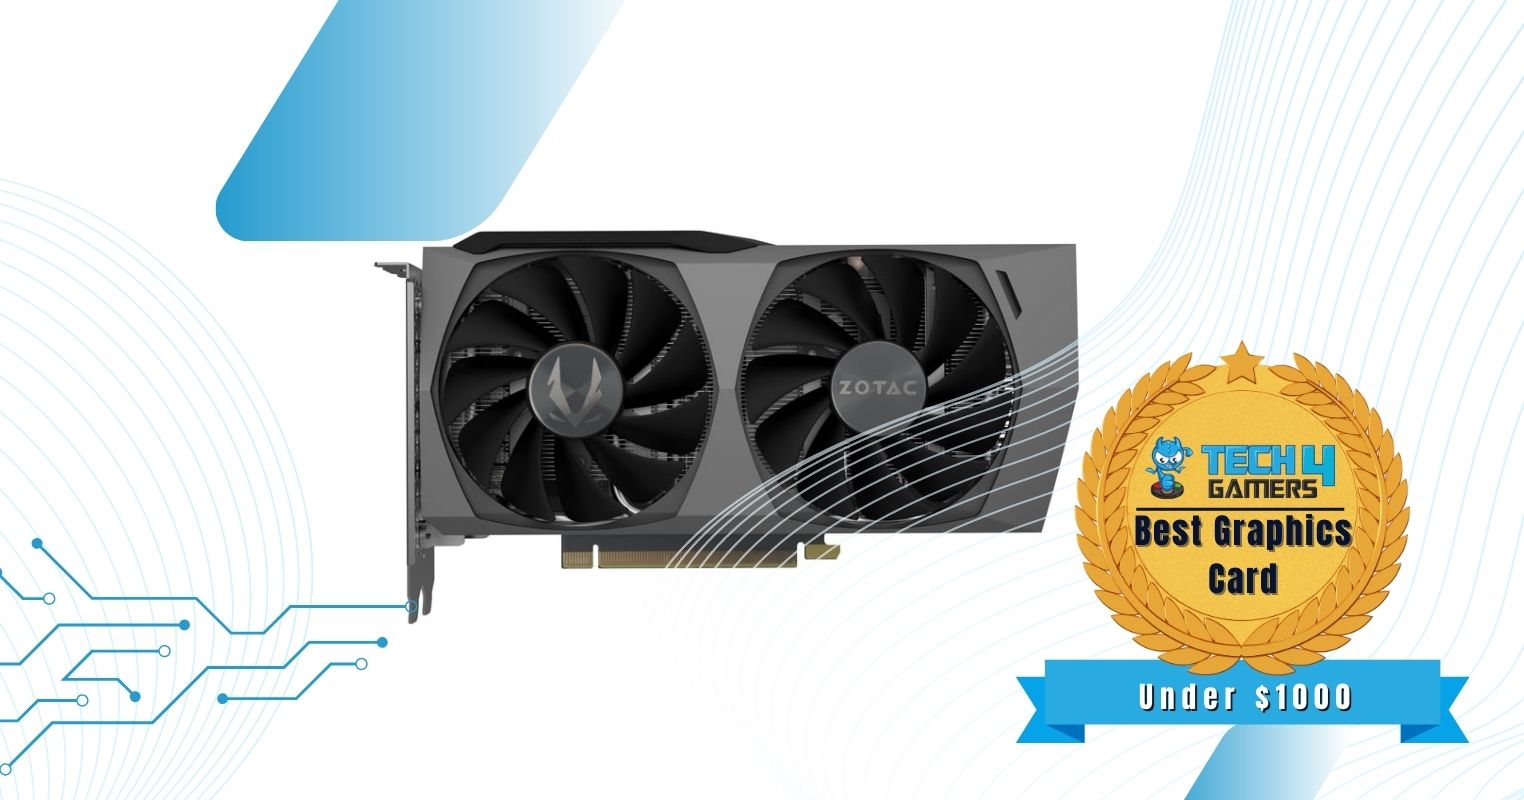 Best $1000 Gaming PC Build — ZOTAC GAMING GeForce RTX 3060 Ti Twin Edge OC LHR Graphics Card